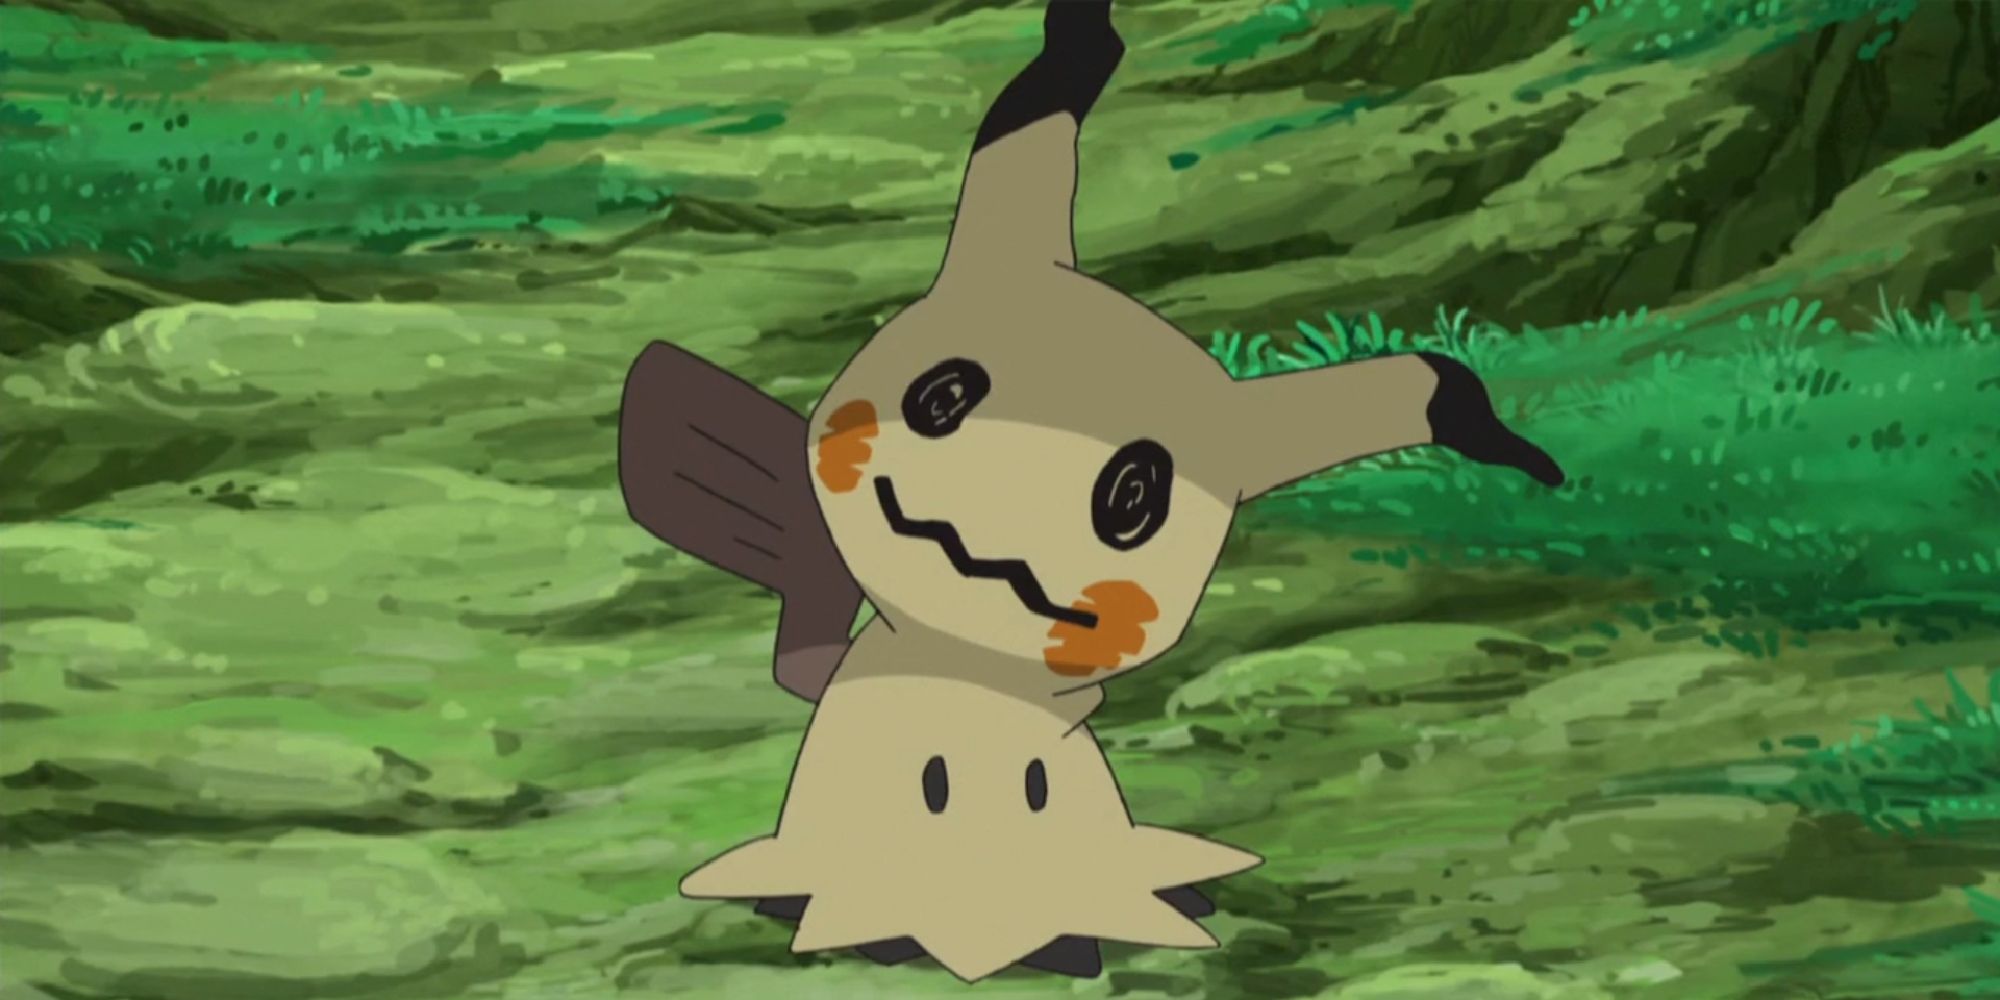 A wild Mimikyu in a forest